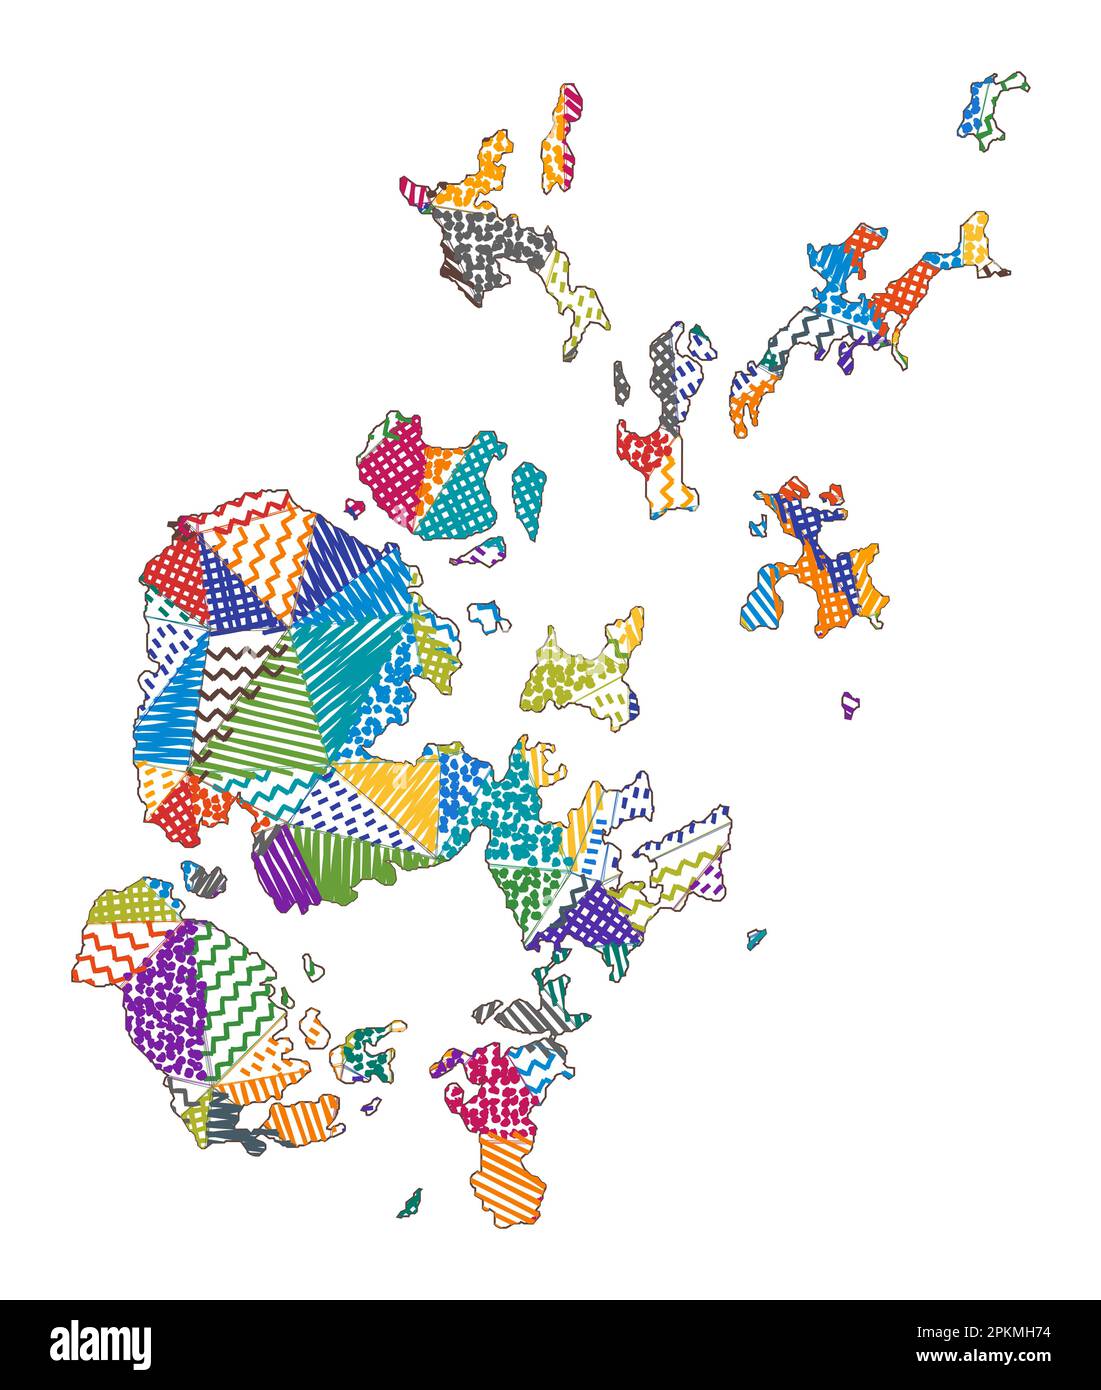 Kid style map of Orkney Islands. Hand drawn polygons in the shape of Orkney Islands. Vector illustration. Stock Vector